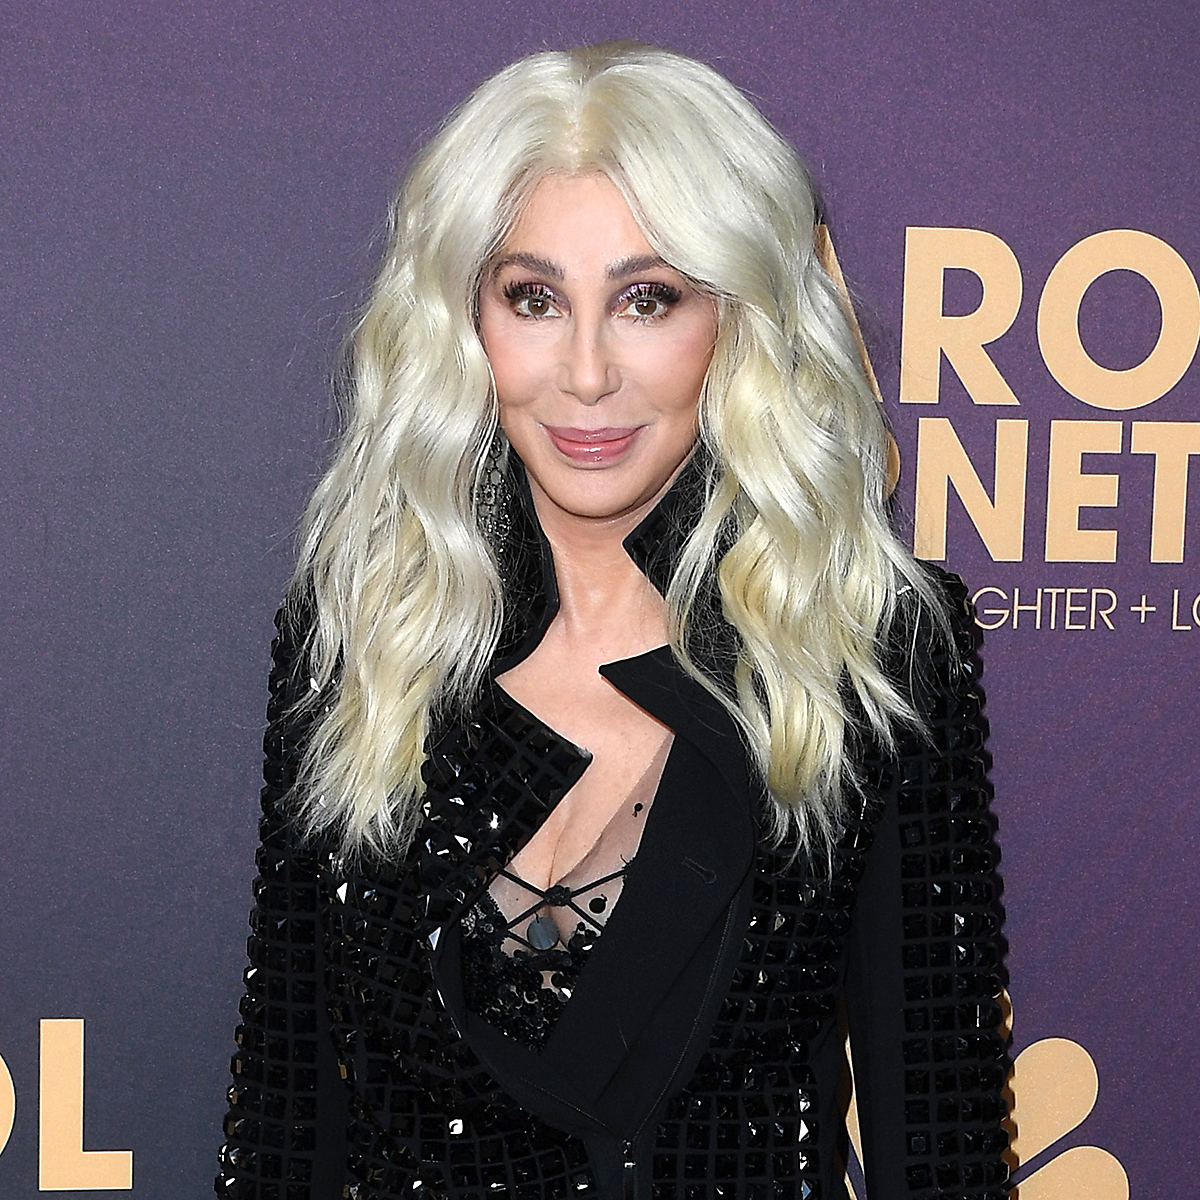 Cher Celebrates 77th Birthday and Questions When She Will “Feel Old”